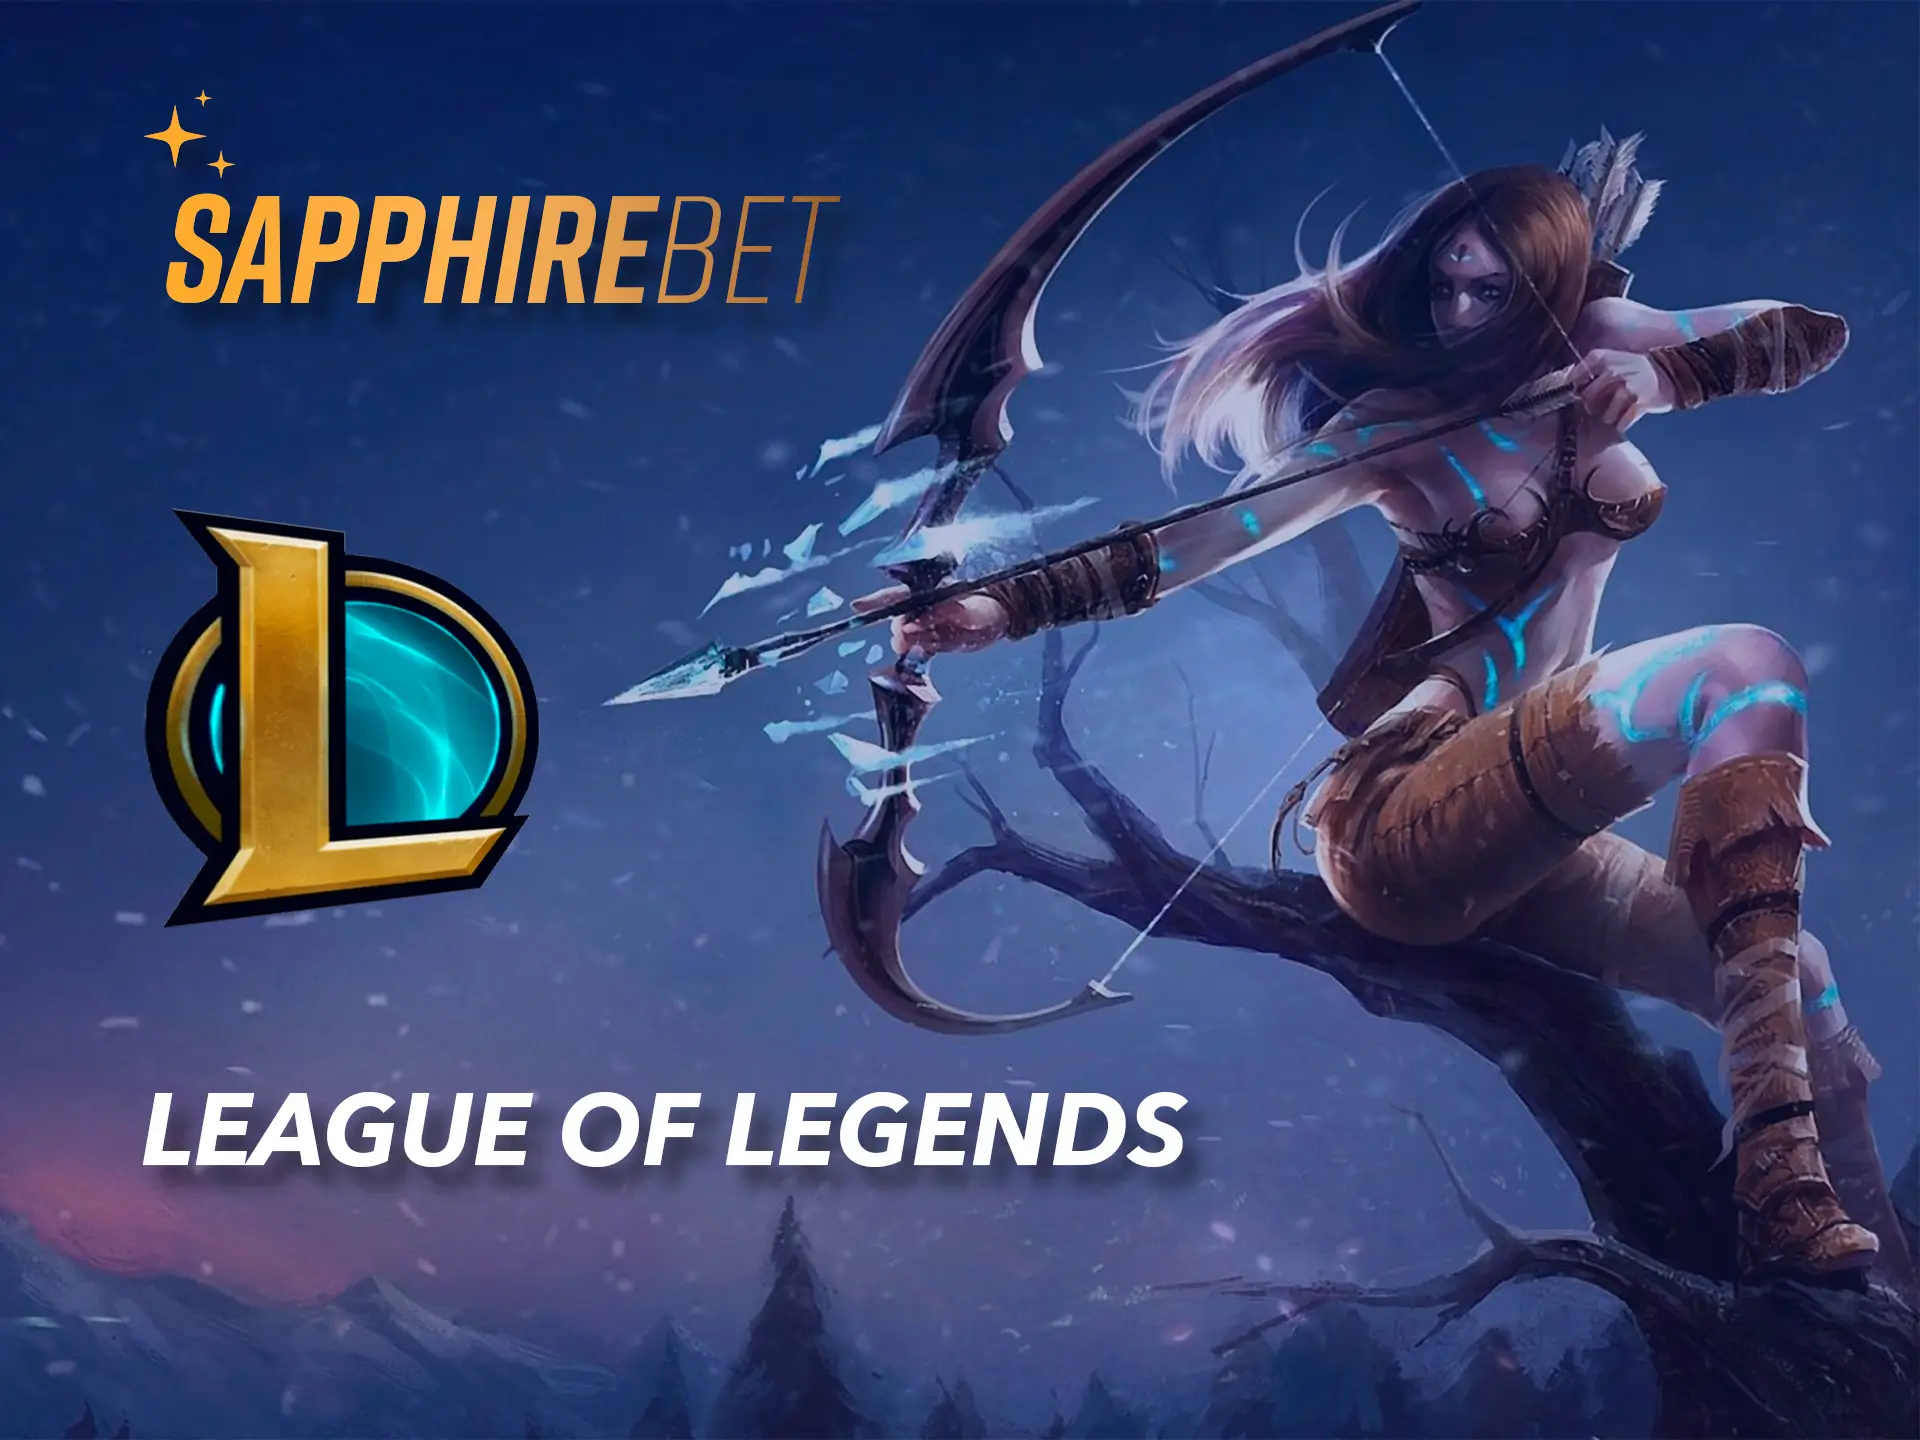 Watch League of legends and make your outcomes at Sapphirebet.